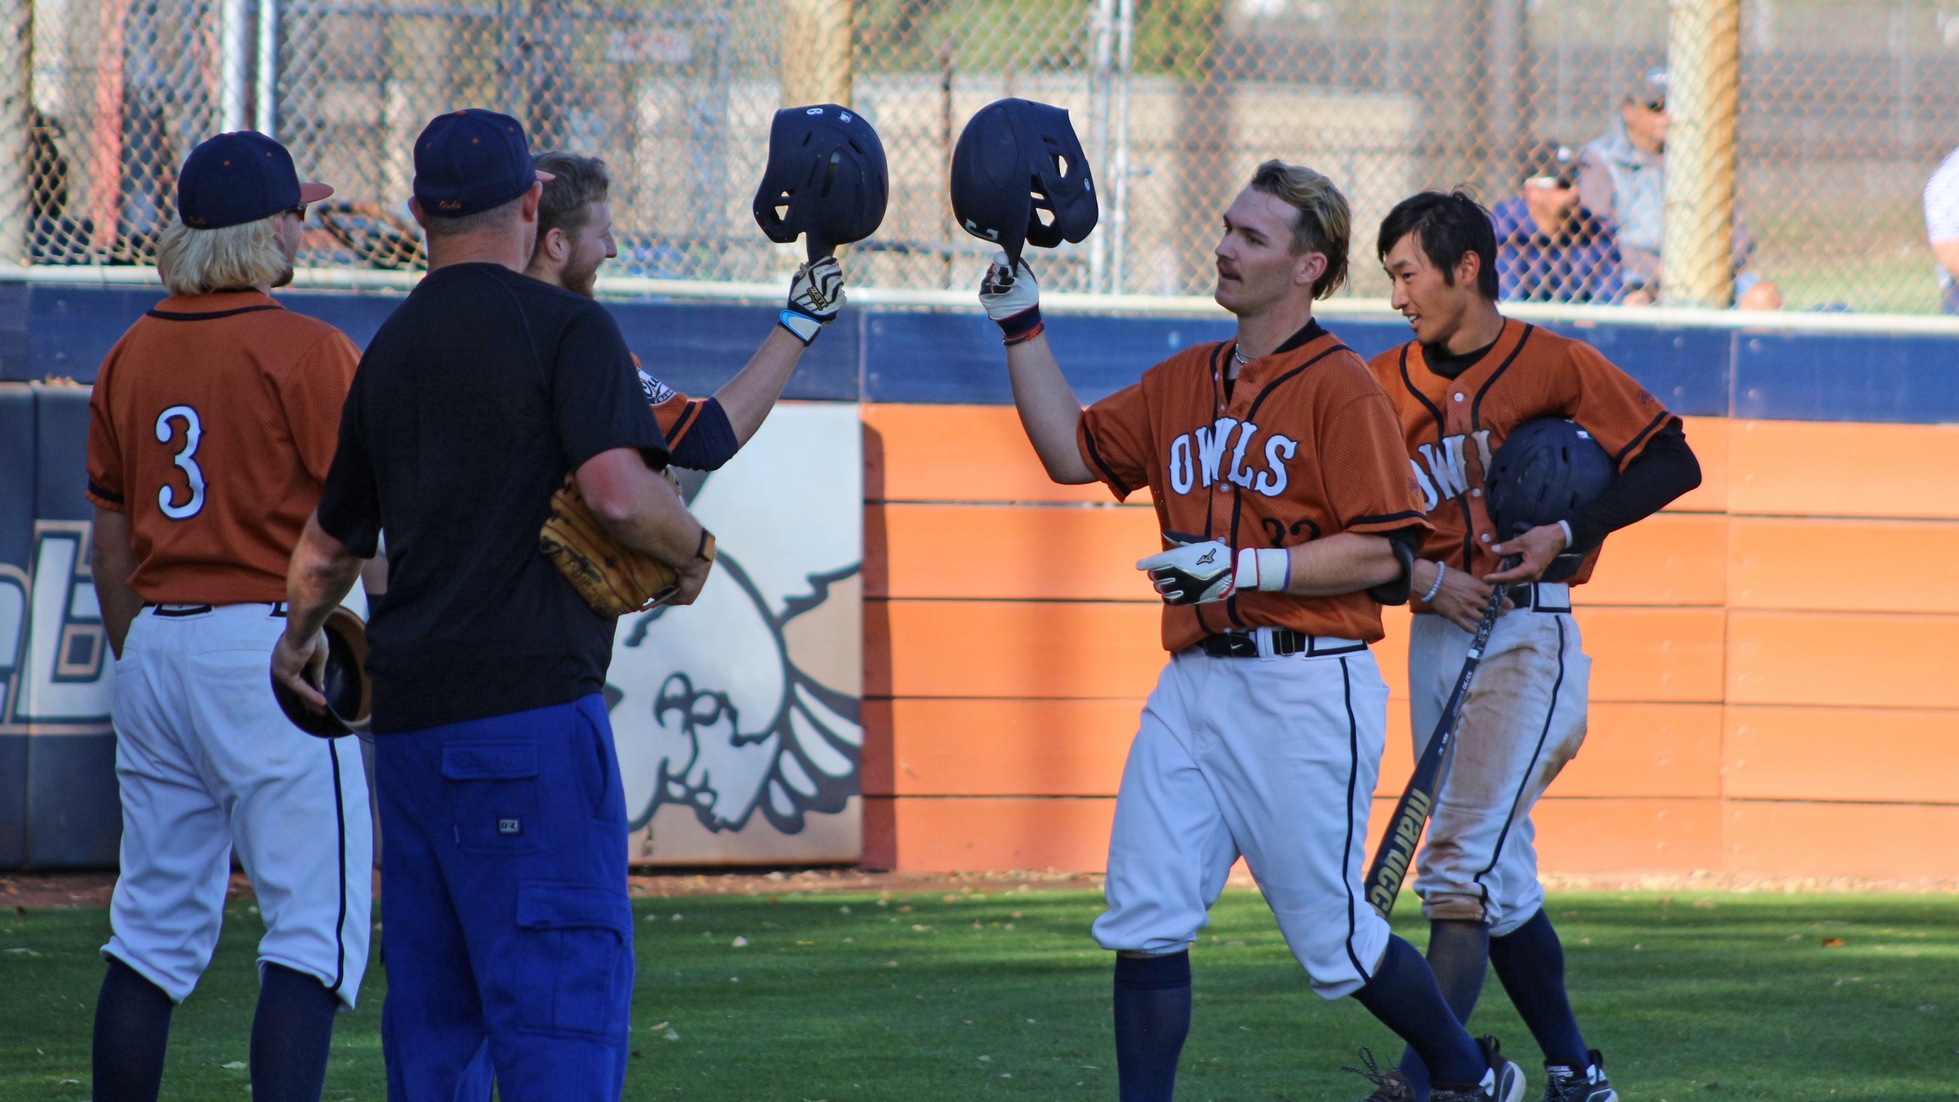 Freshman Brett Bowers was 2-for-3 with a three-run homer to help Citrus grab a 9-2 win over Ventura. Photo By: Brian Cone.